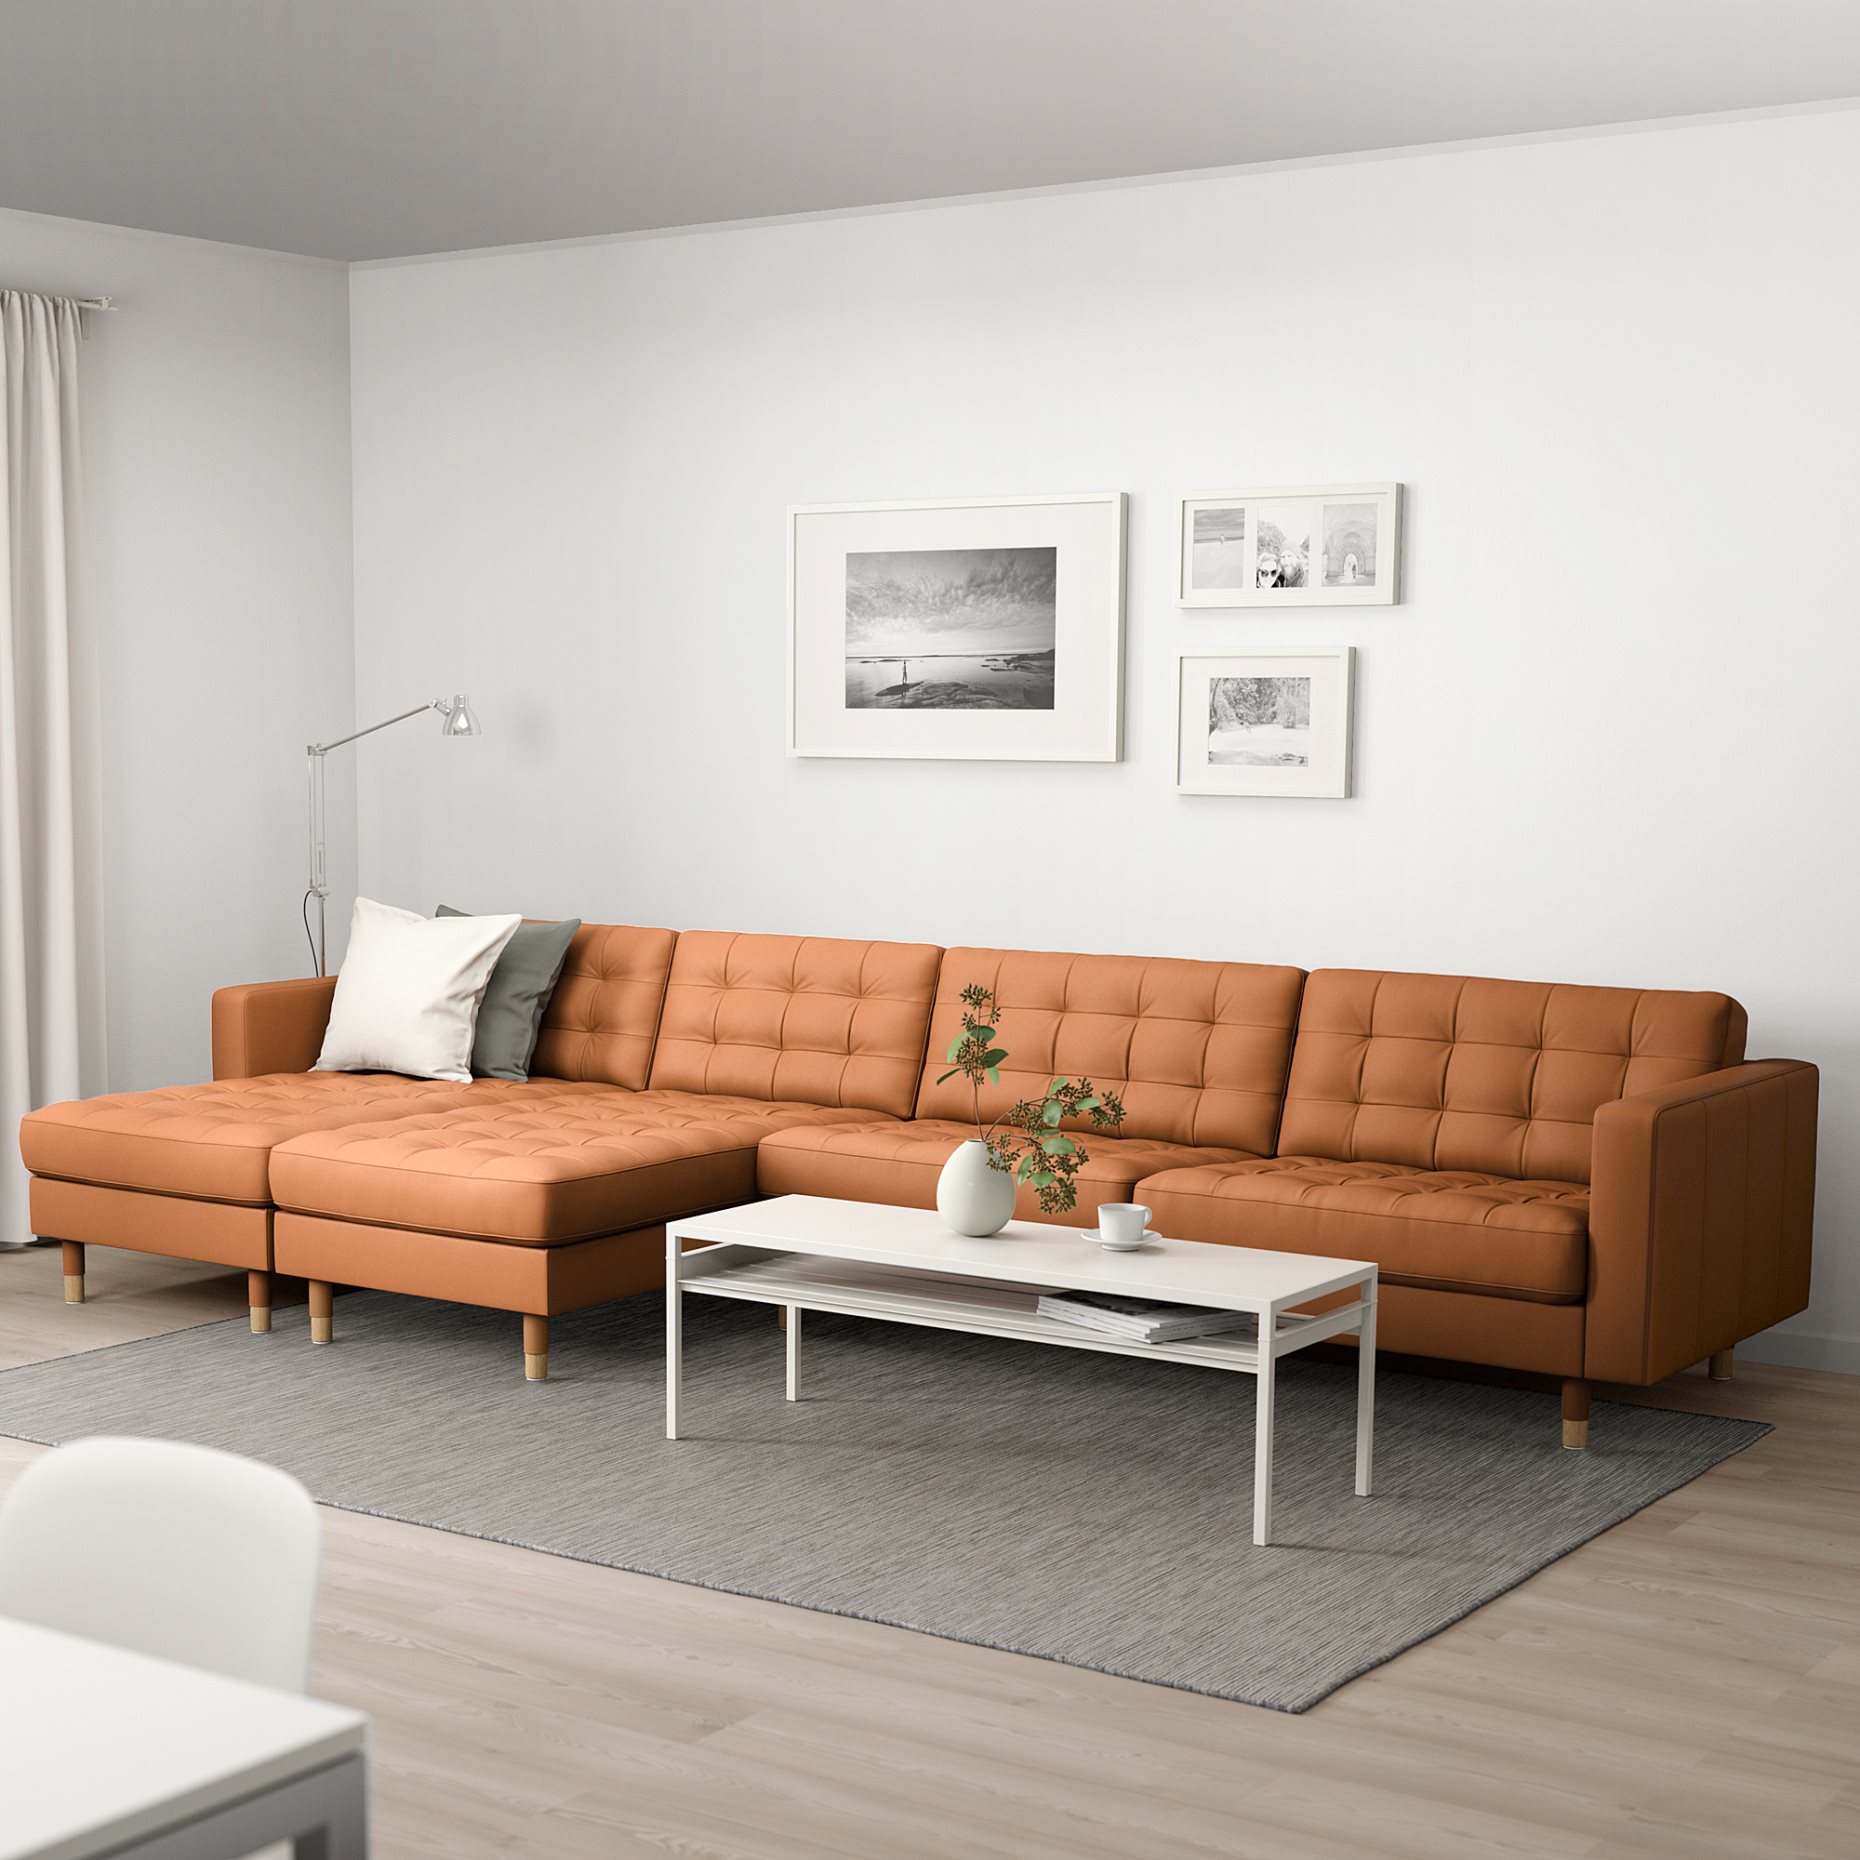 LANDSKRONA, 5-seat sofa with chaise longues, 292.691.54